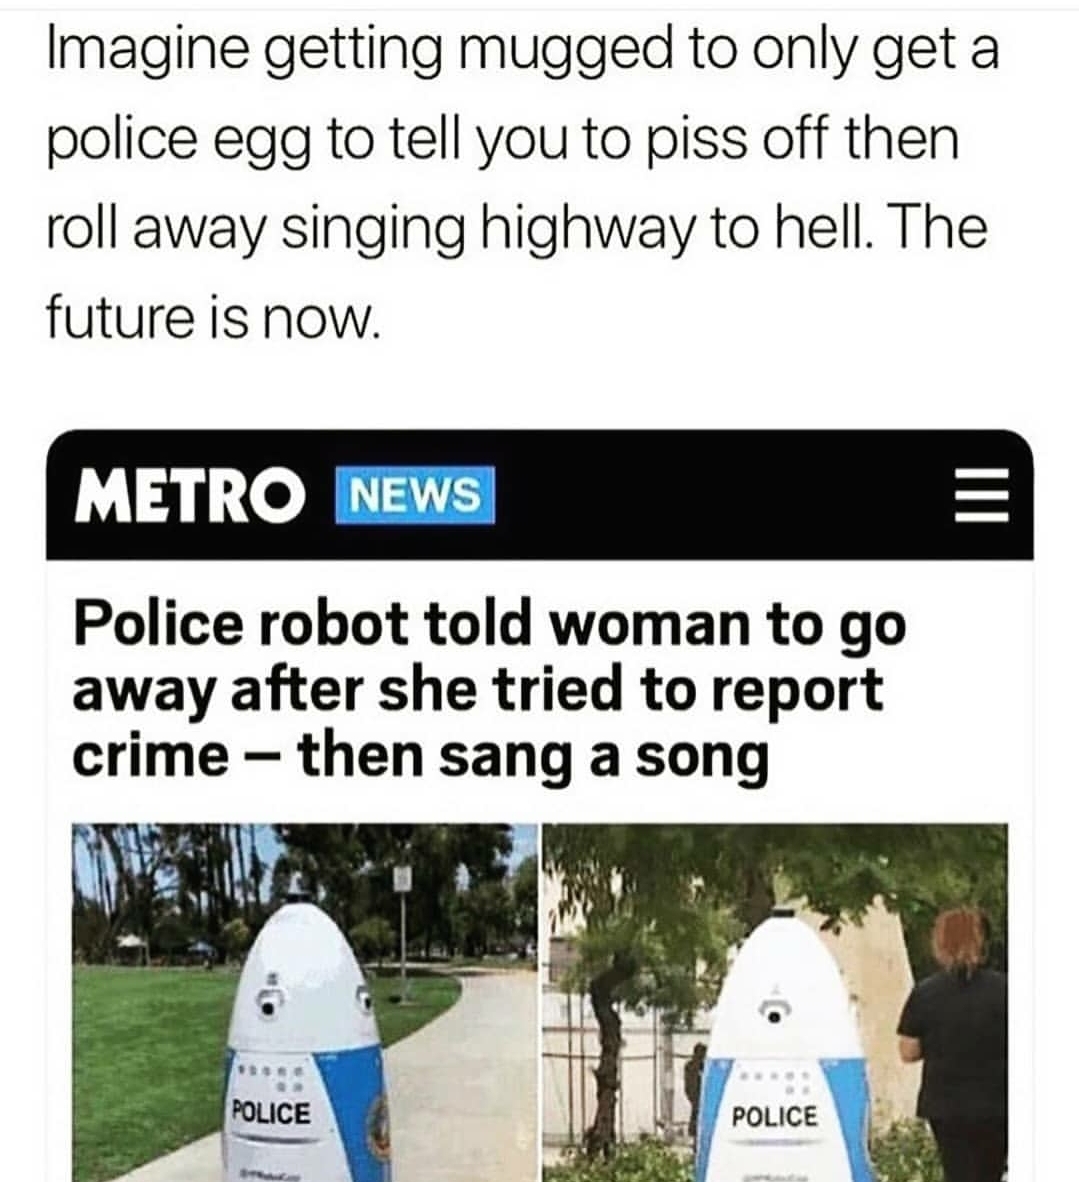 police robot tells woman to go away - Imagine getting mugged to only get a police egg to tell you to piss off then roll away singing highway to hell. The future is now Metro News O Police robot told woman to go away after she tried to report crime then sa